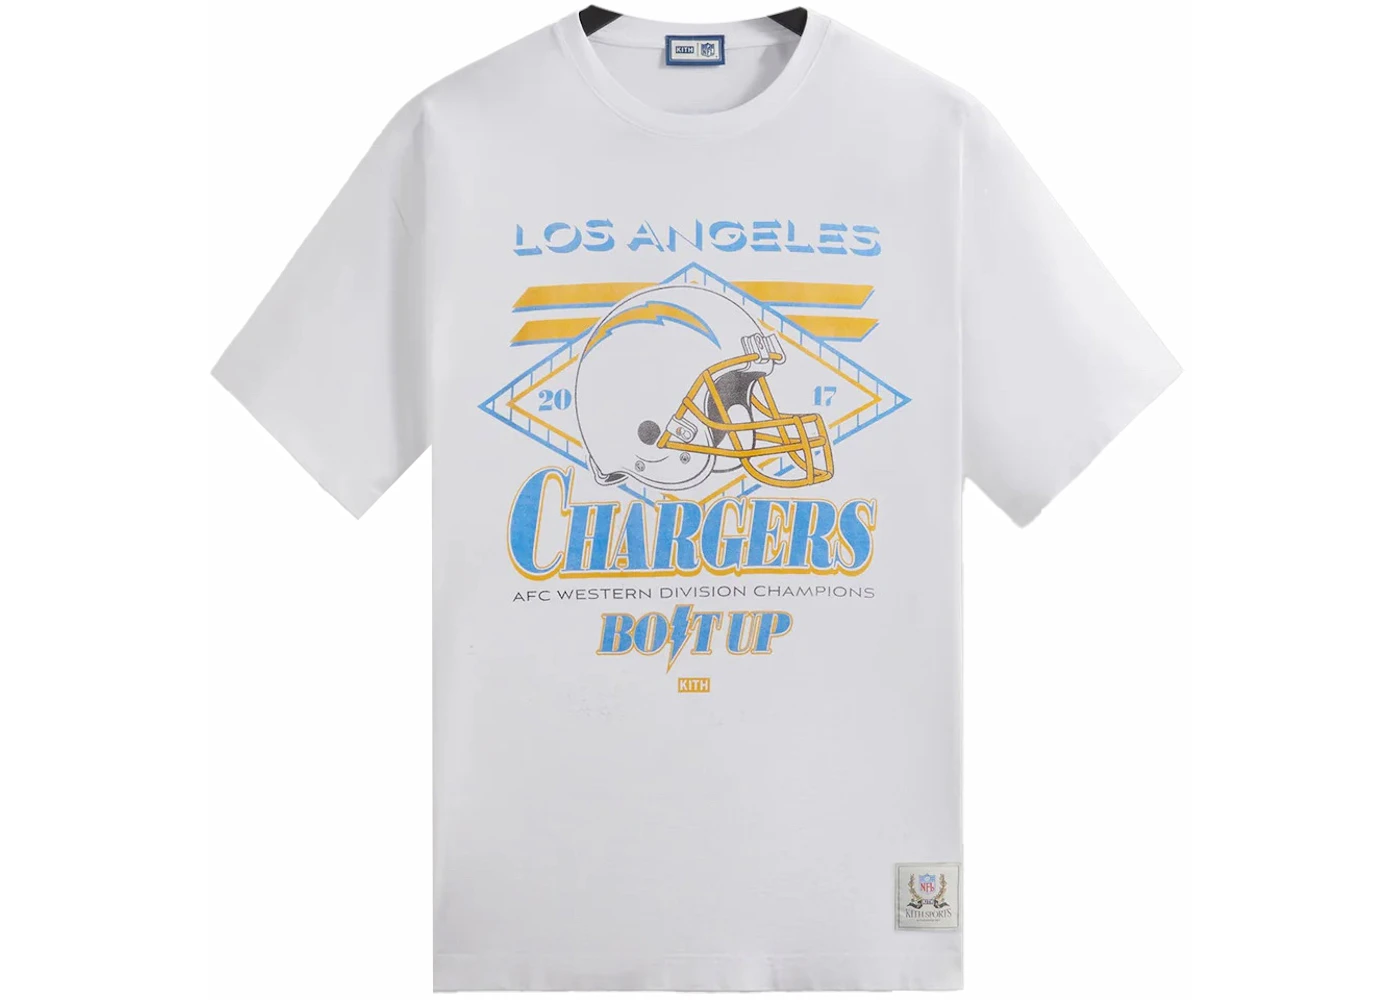 Kith x NFL Chargers Vintage Tee White